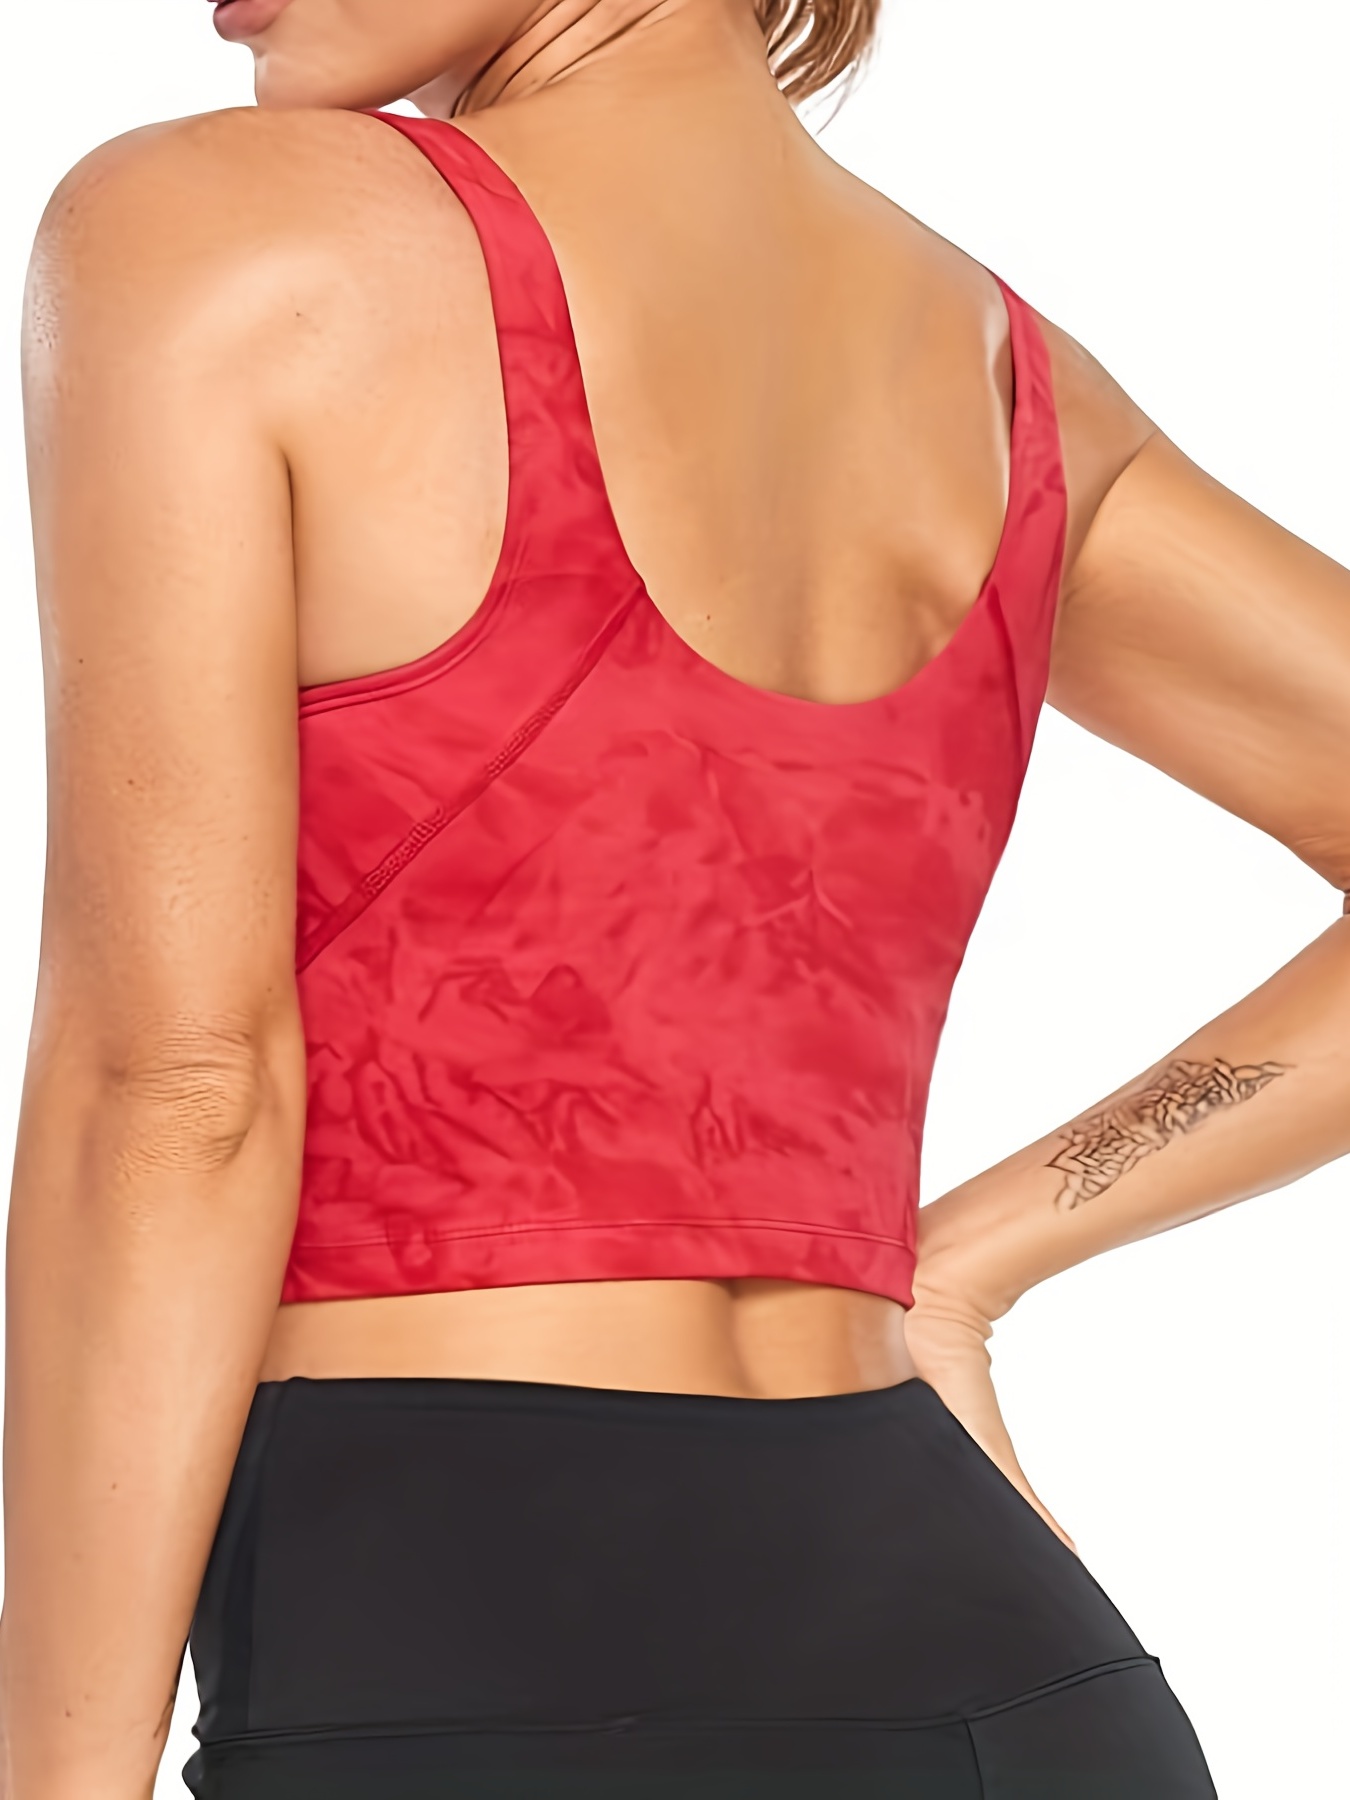 Buy HHUQ Women's Longline Sports Bra Wirefree Padded Medium Support Yoga  Bras for Running Workout Tank Tops（Rose Red，L） at